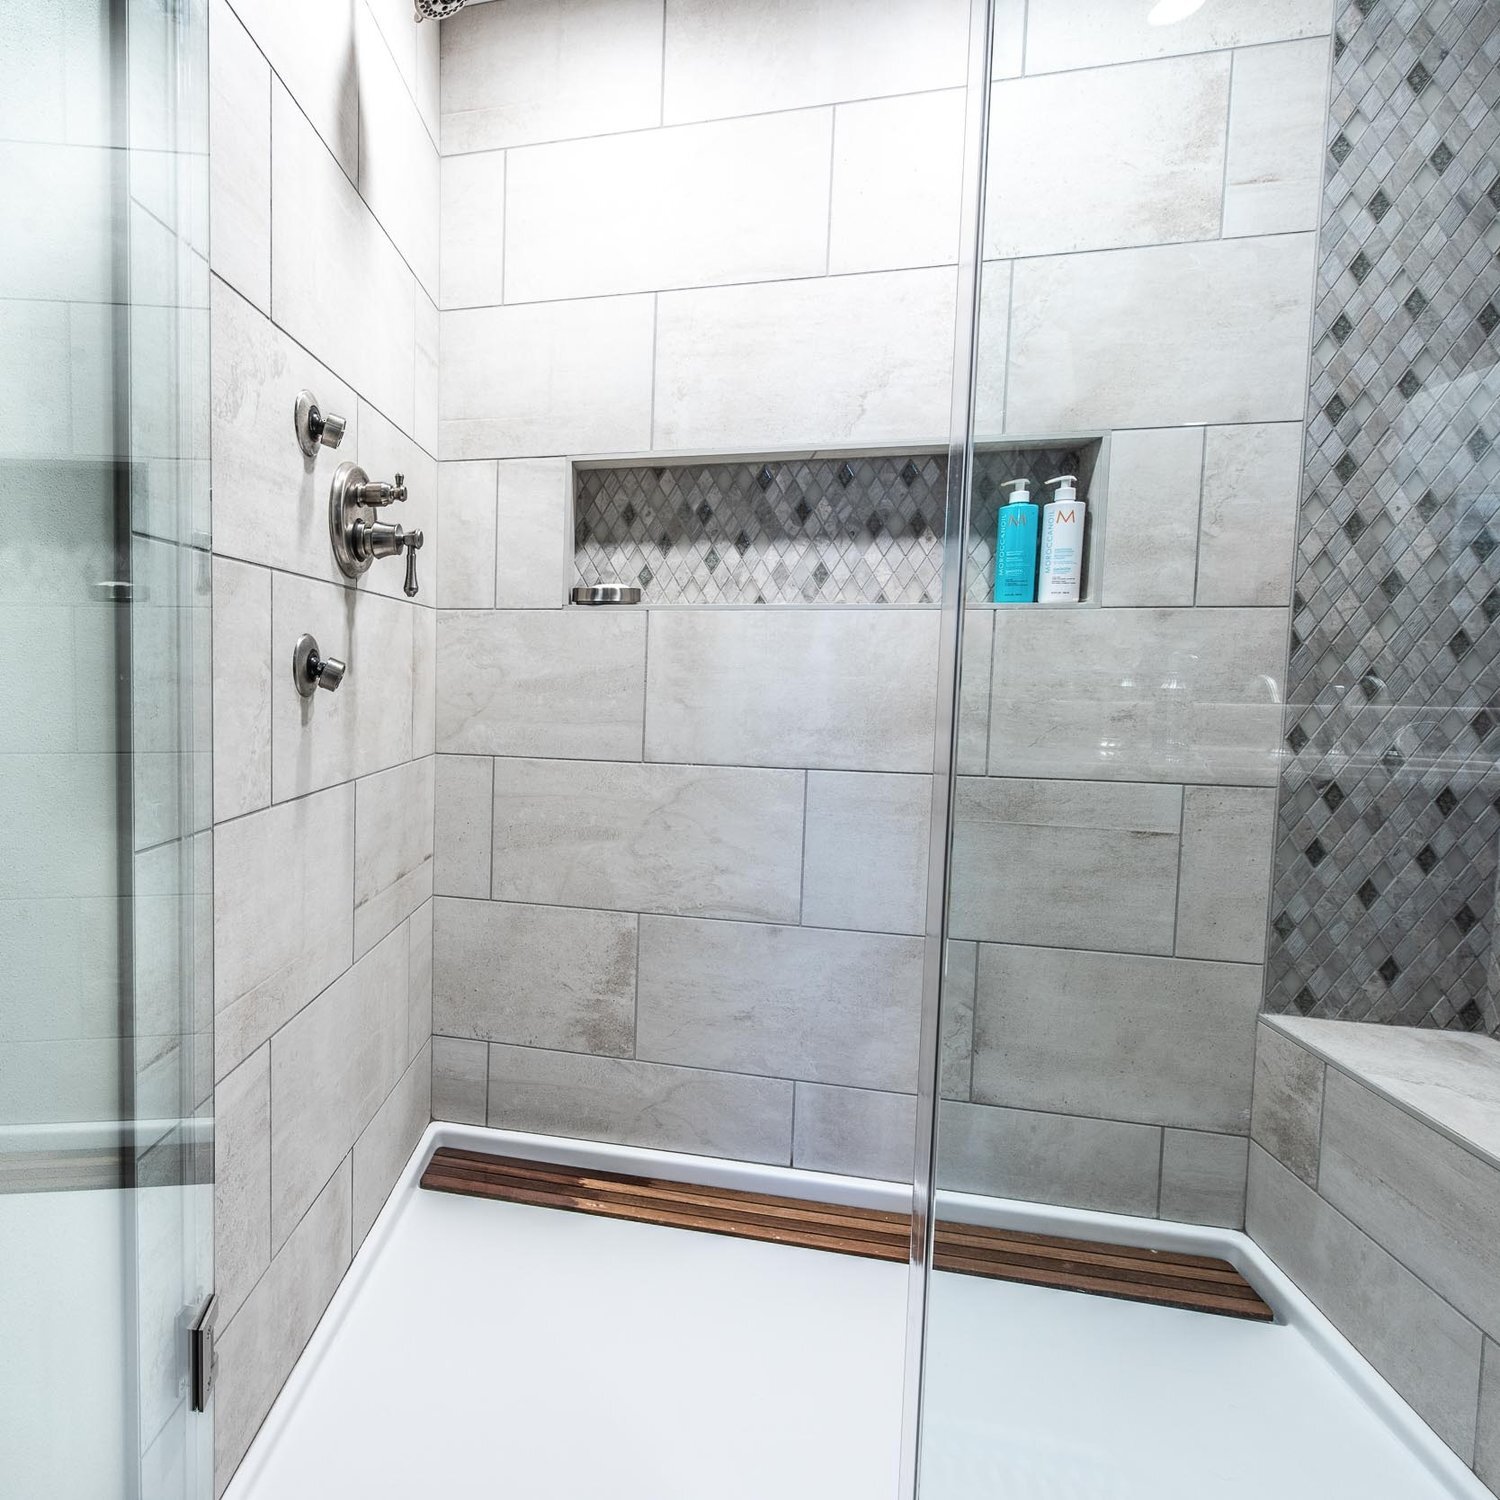 What Is The Schluter Shower System And, Shower Floor Systems For Tiling